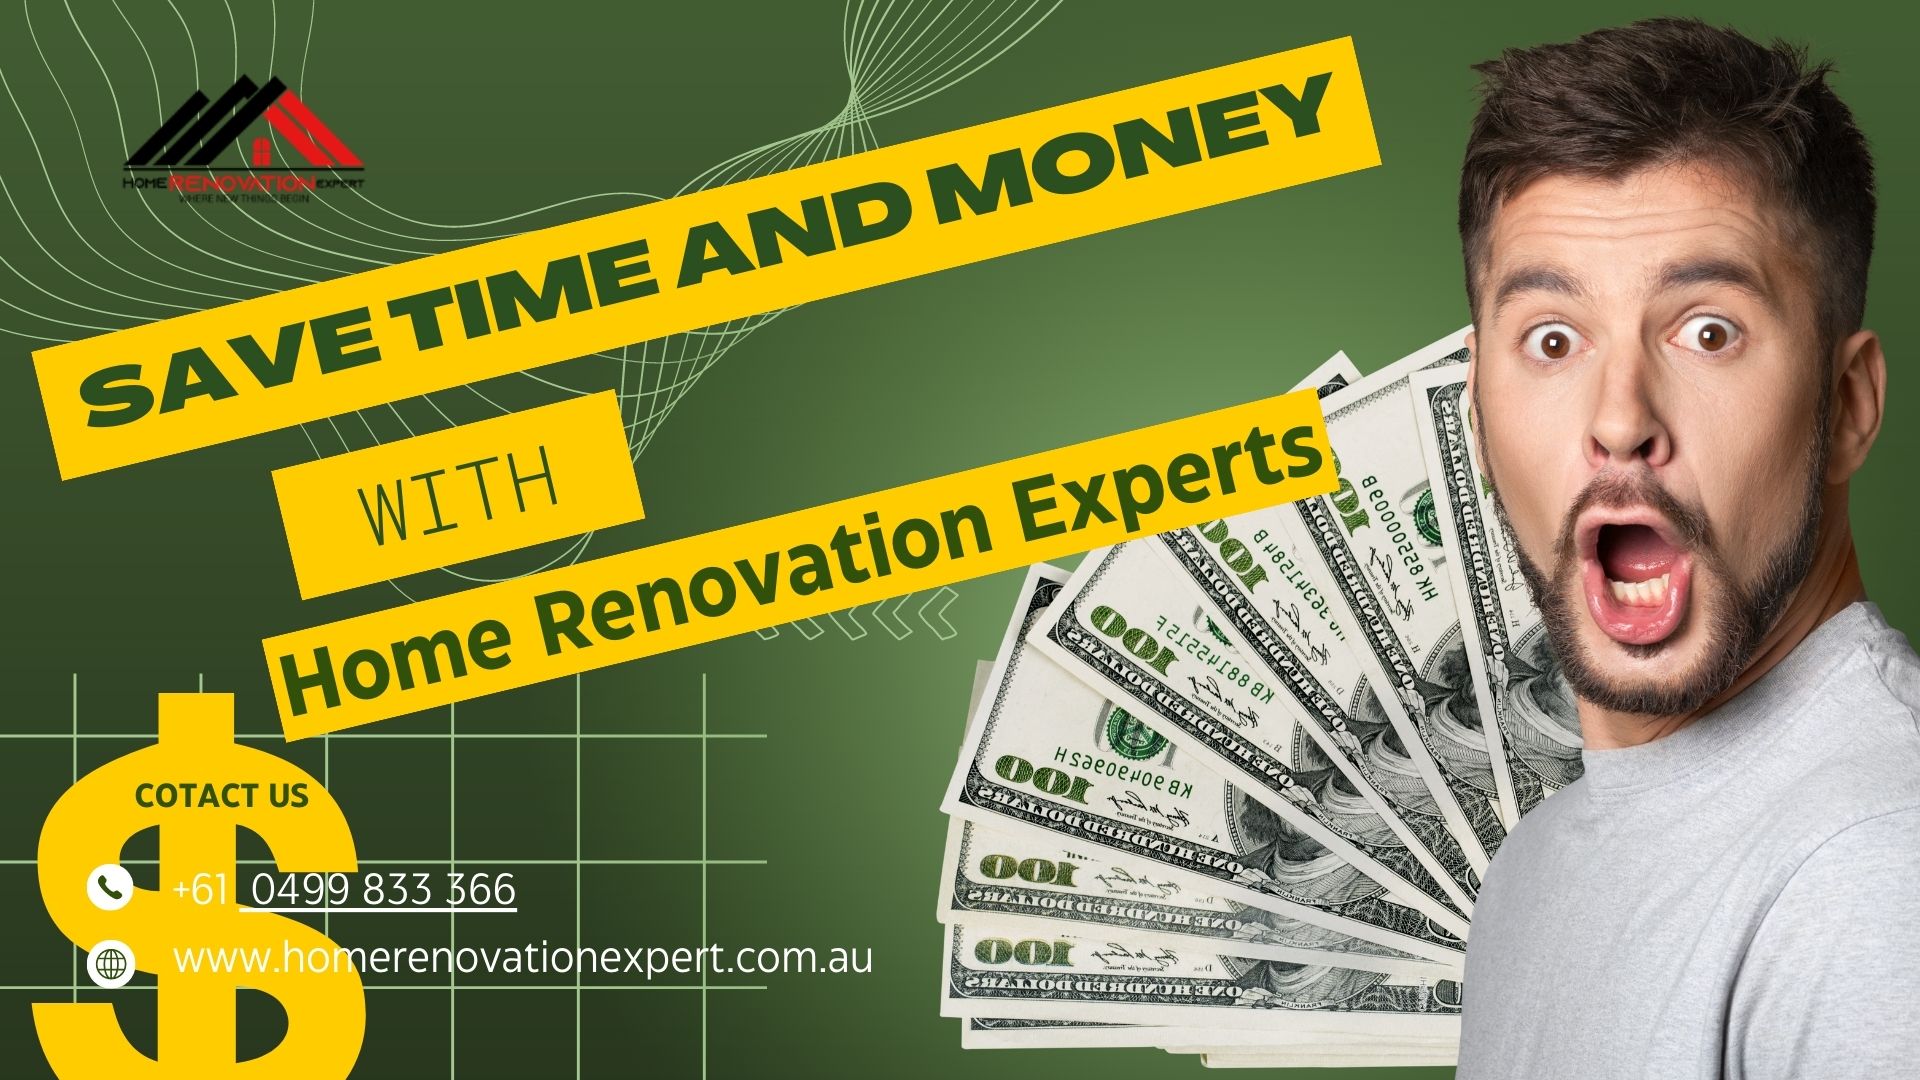 Save Time and Money with Our Home Renovation Experts! - Melbourne Construction, labour